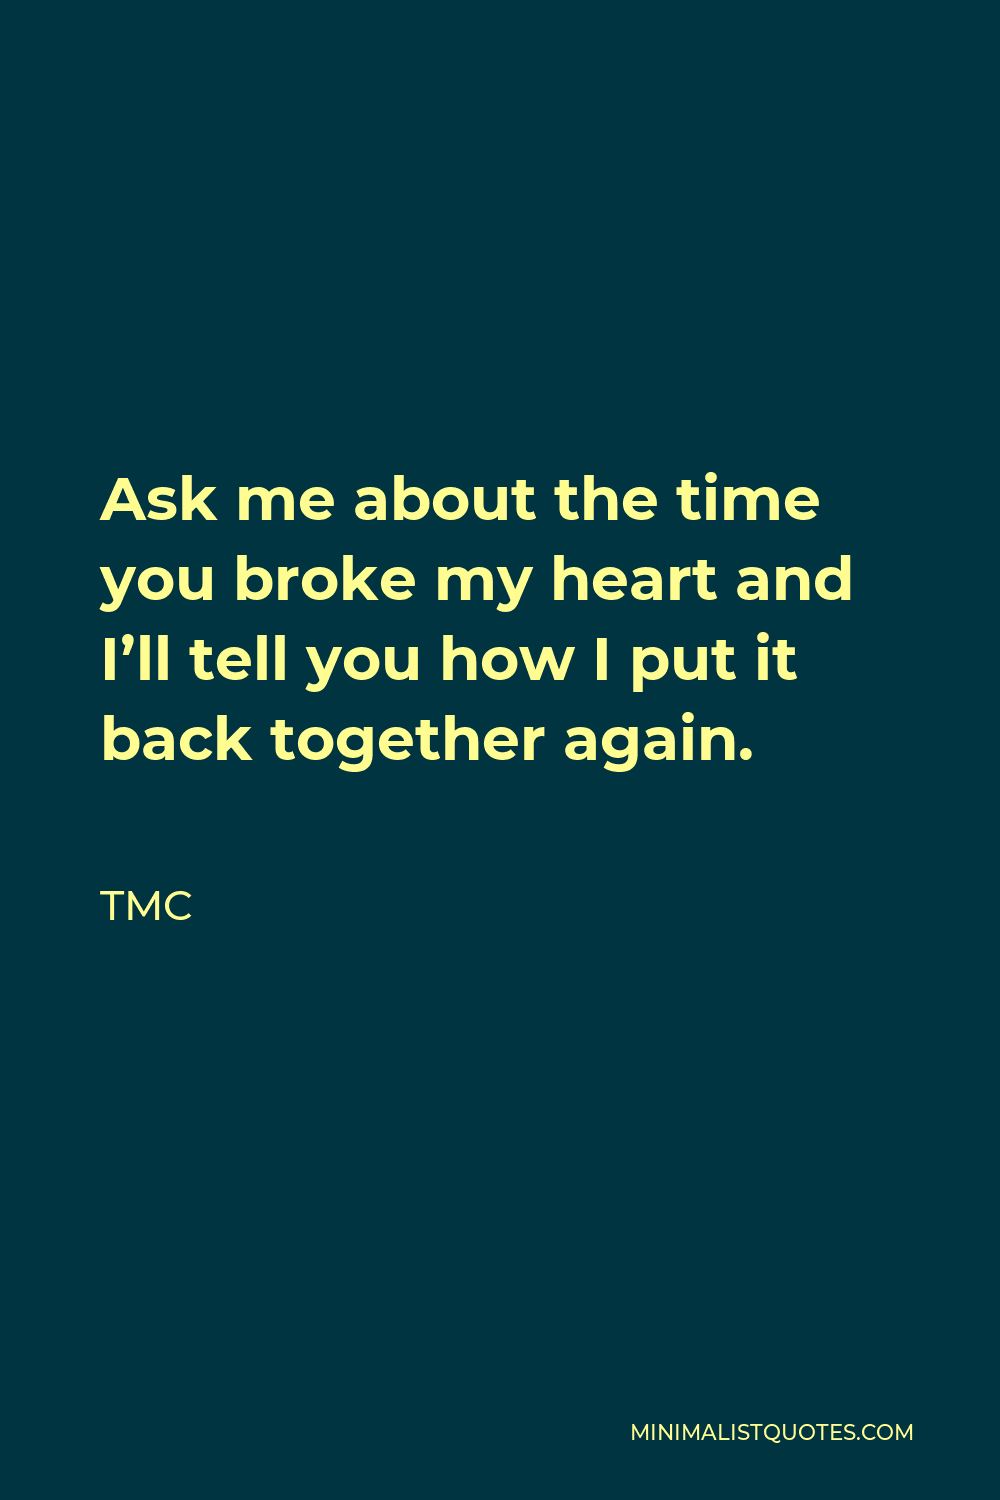 TMC Quote - Ask me about the time you broke my heart and I’ll tell you how I put it back together again.